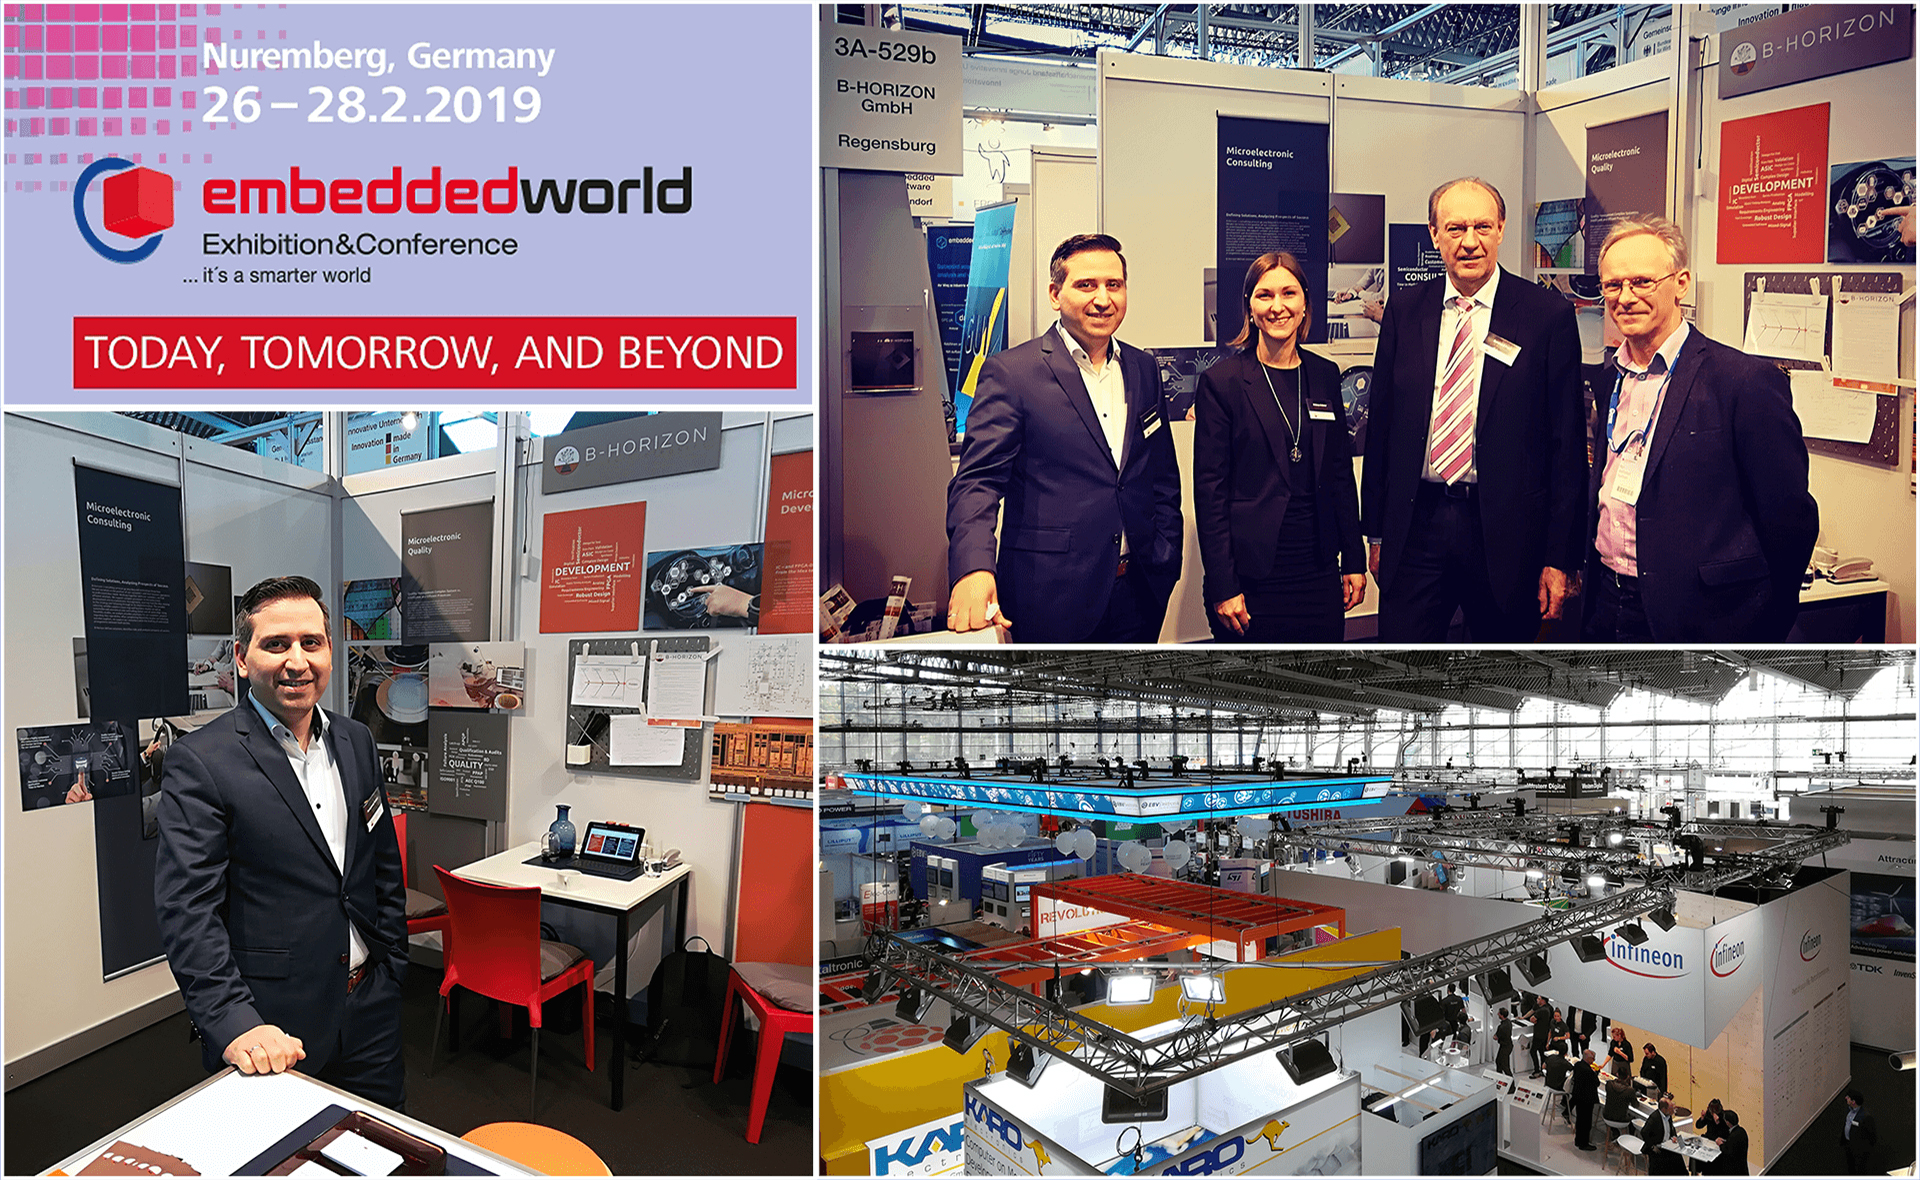 Photo collage of B-Horizon’s team and their booth at the Embedded World in Nürnberg, the international leading fair for embedded systems. This group photo shows founder and CEO Mohammad Kabany, Helena Krämer (Executive Management Assistant), Bernhard Pohl (Head of Quality Management) and Josef Schmid (Engineer at iSyst Intelligente Systeme GmbH) in front of the booth.